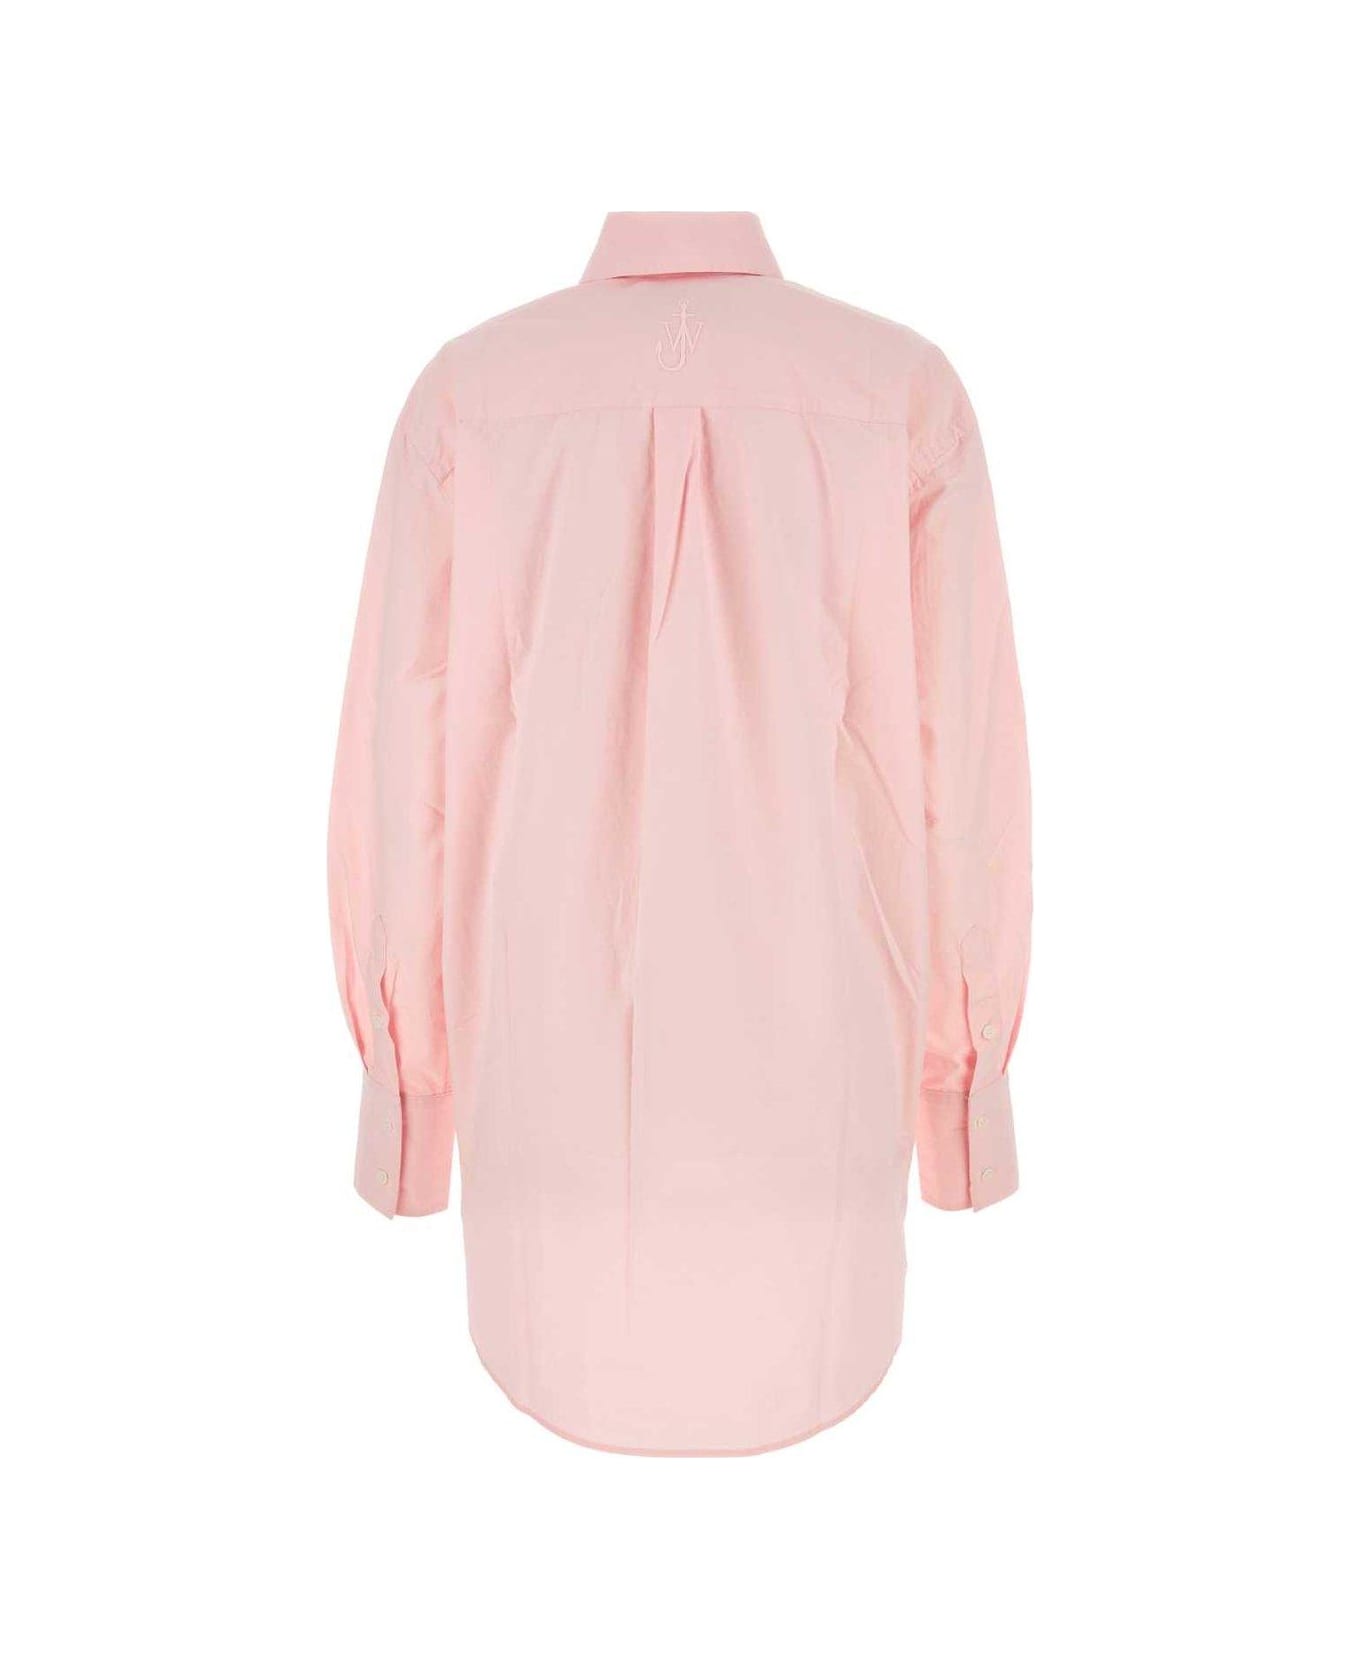 J.W. Anderson Buttoned Oversized Shirt - PINK シャツ